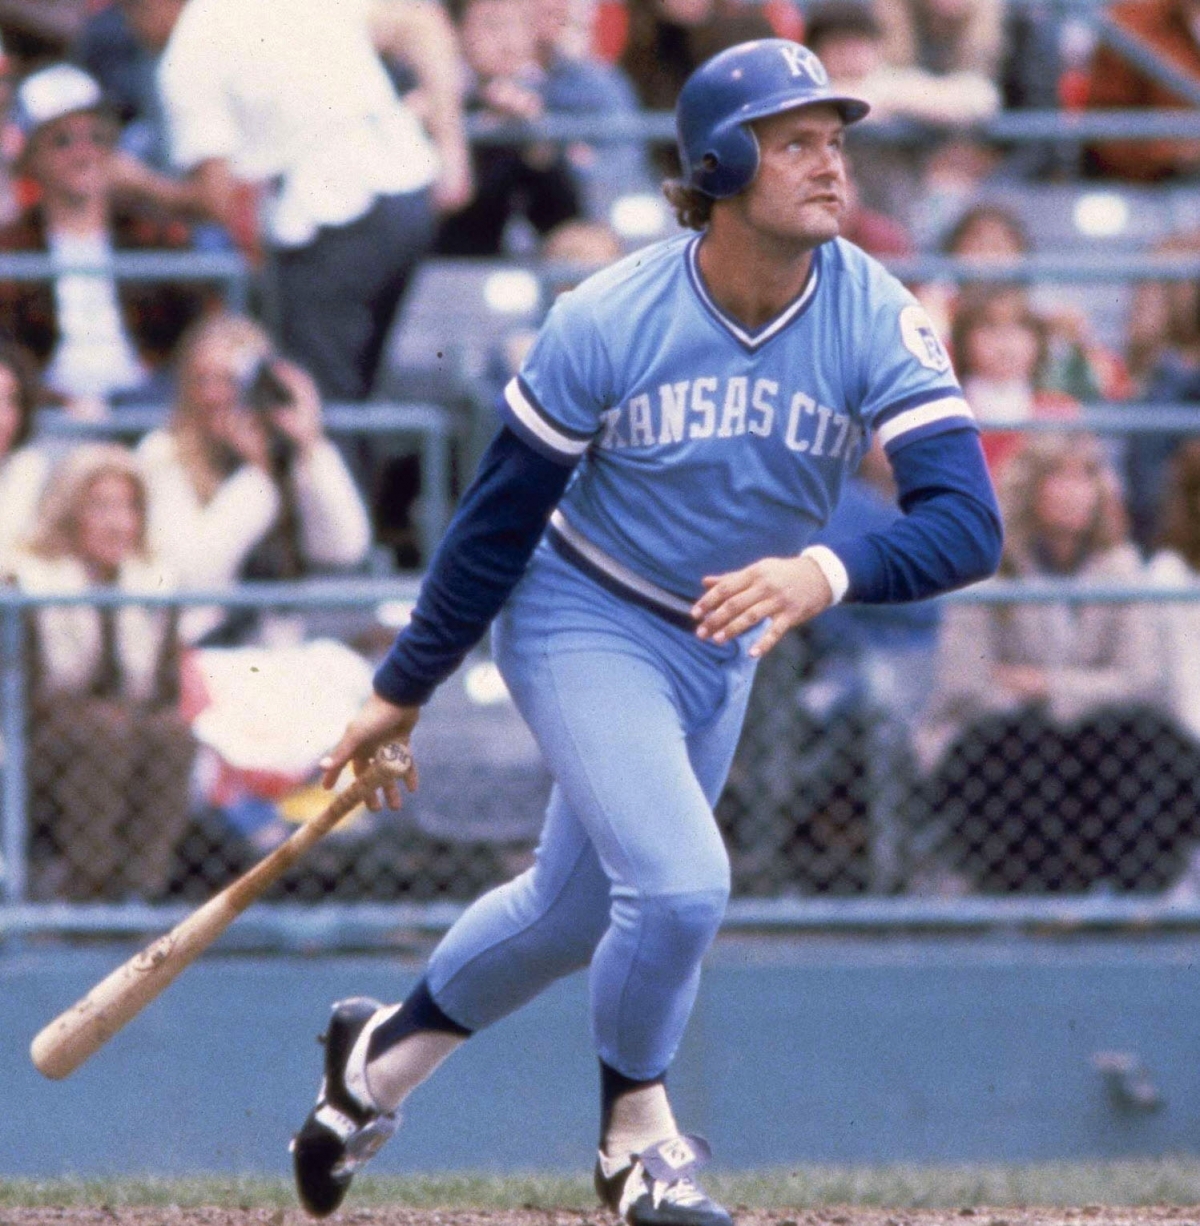 Not in Hall of Fame - 1. George Brett